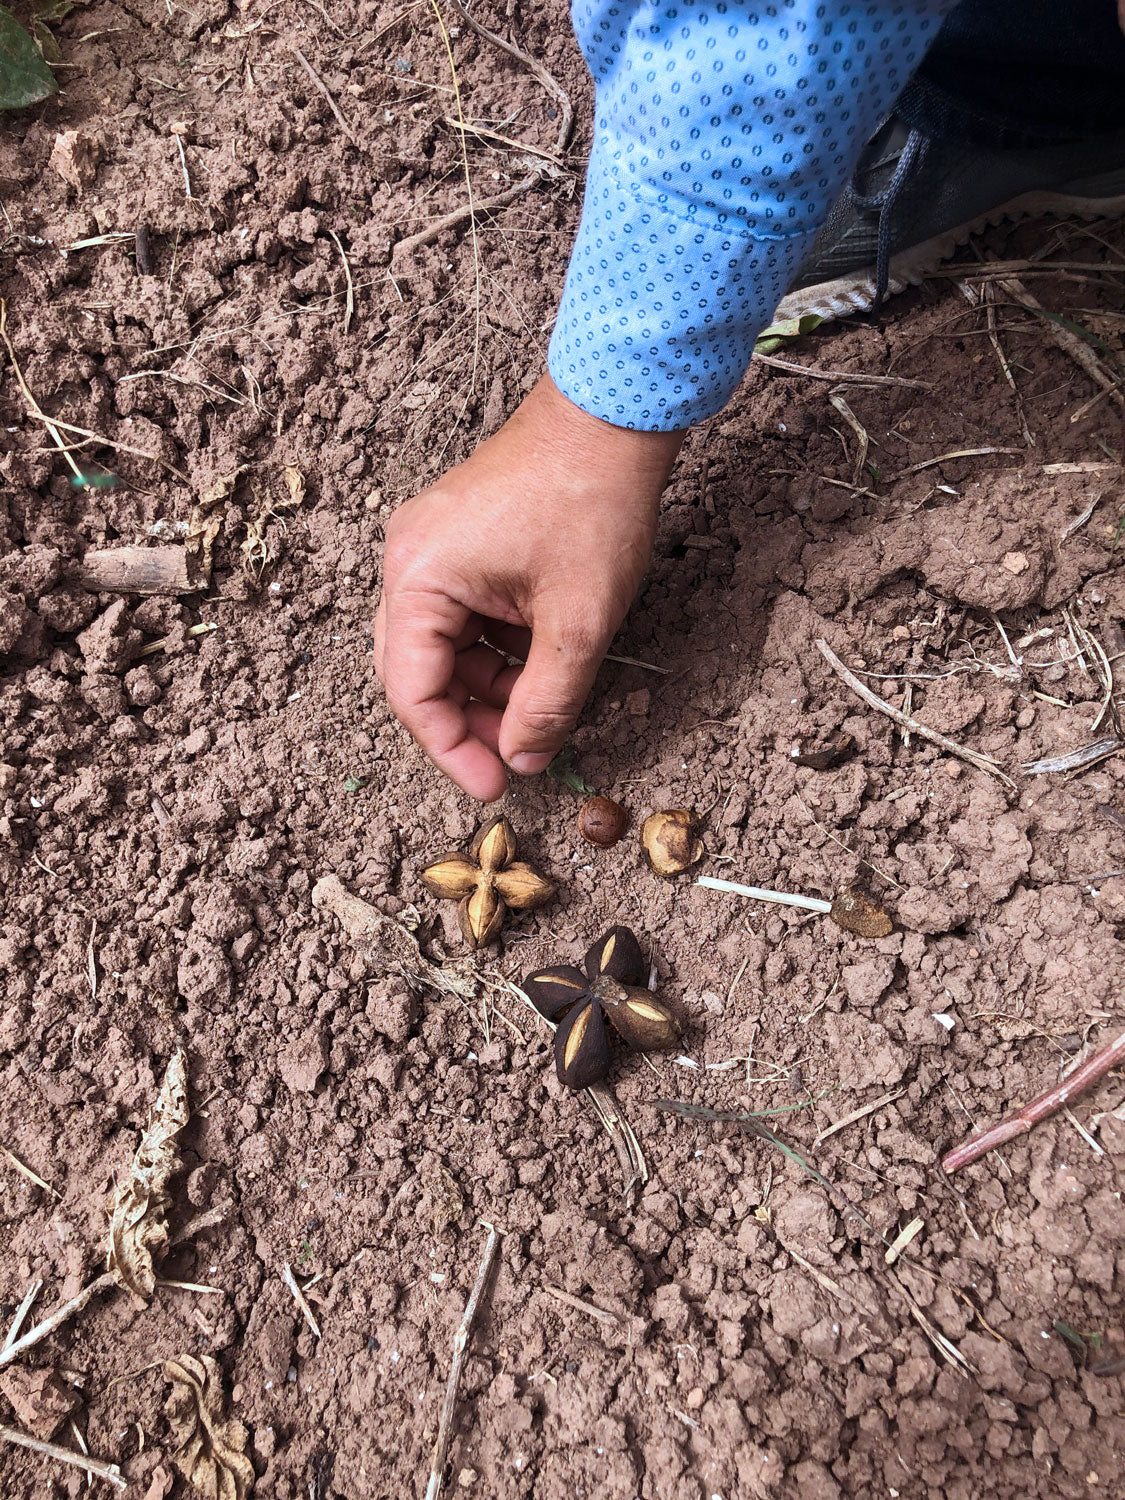 Sandeep pointing to organic inca peanut seeds in the soil